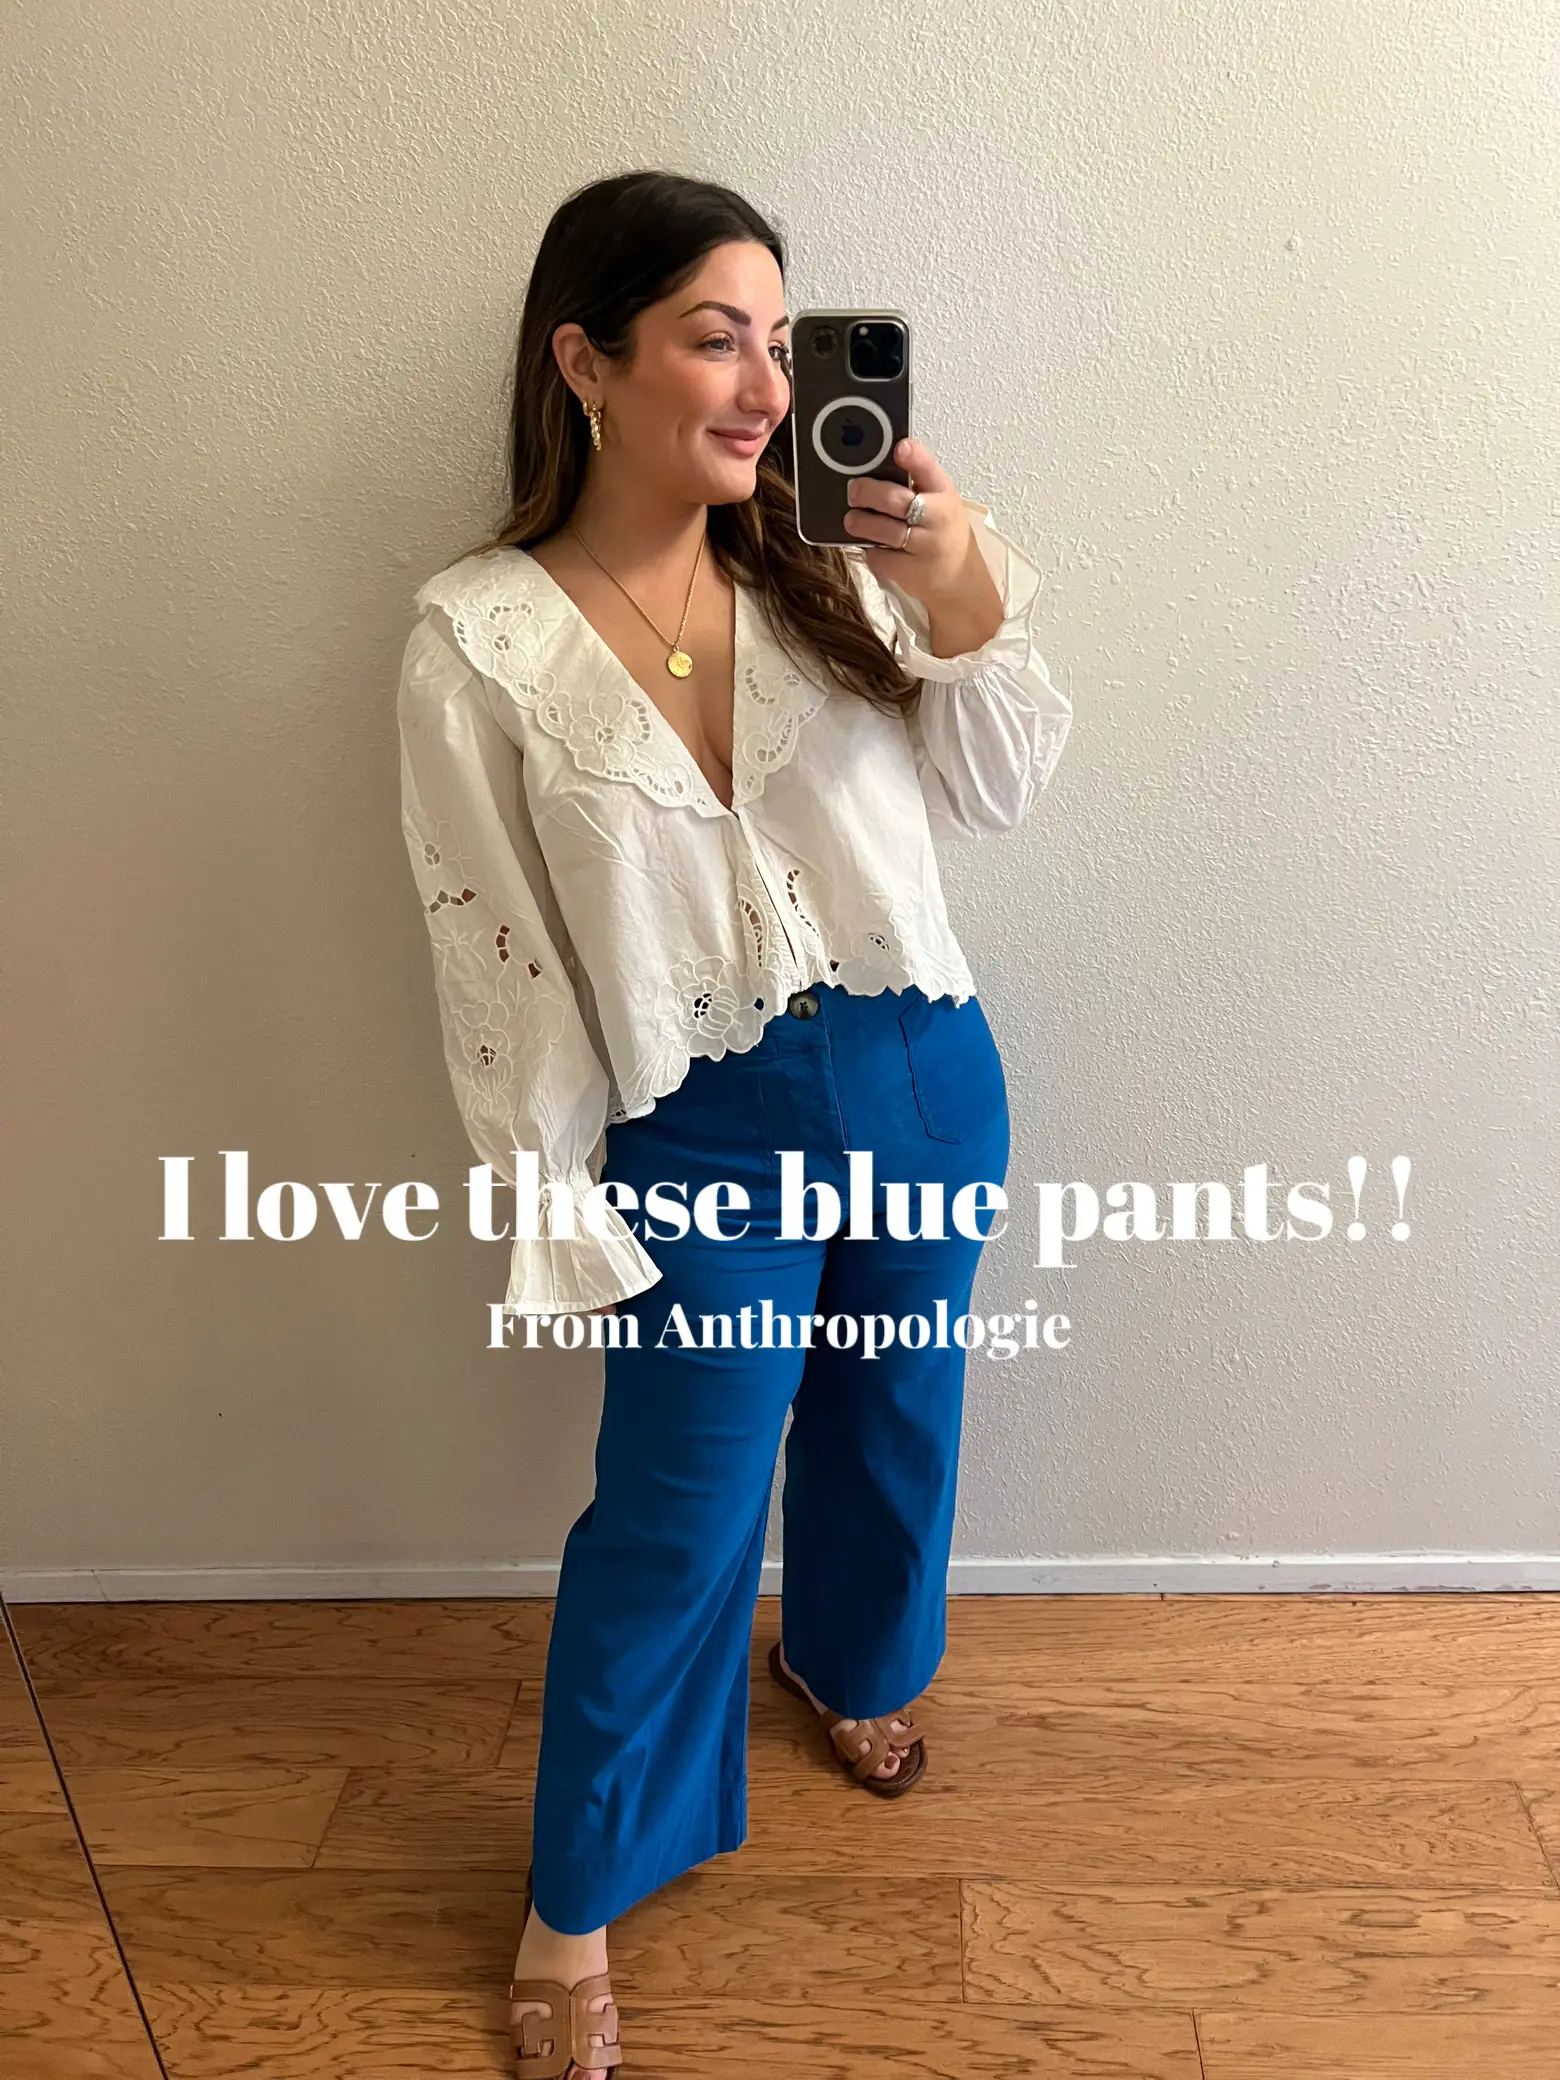 7 Petite Wide Leg Pants Outfit Ideas, Gallery posted by Cathy Peshek